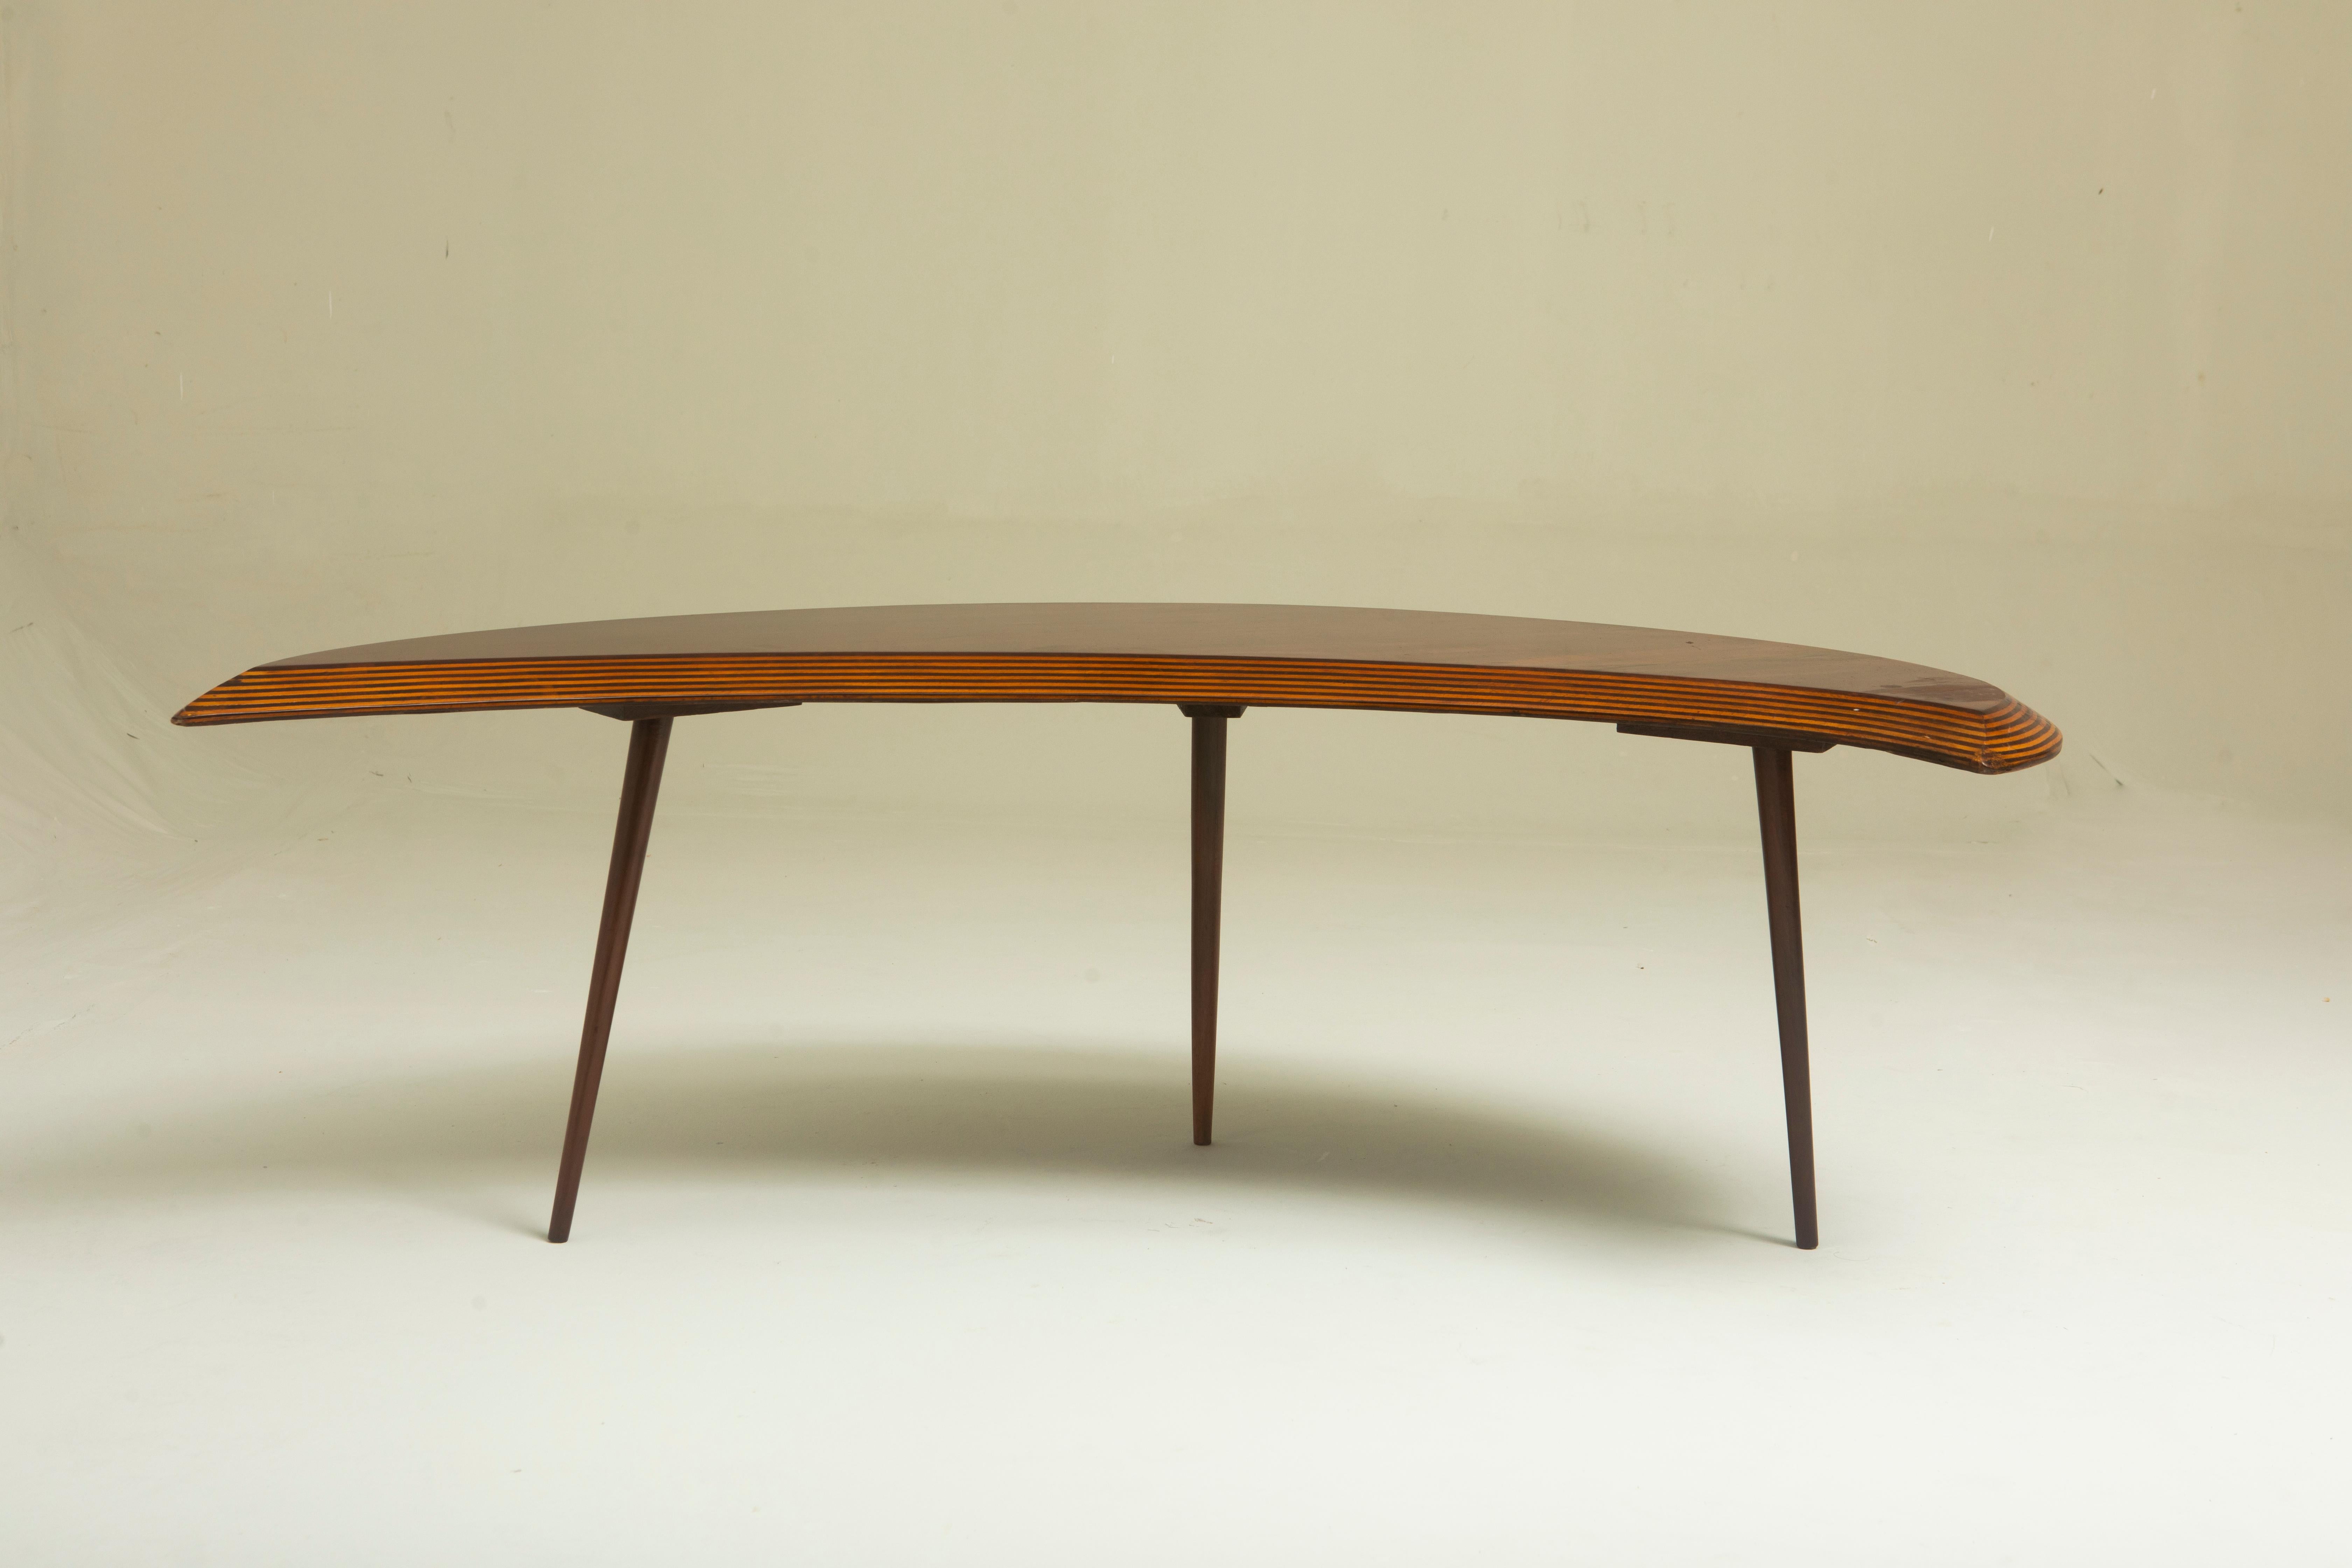 'Half Moon' Center Table by CIMO Studio, Brazil, 1950s In Good Condition For Sale In Deerfield Beach, FL